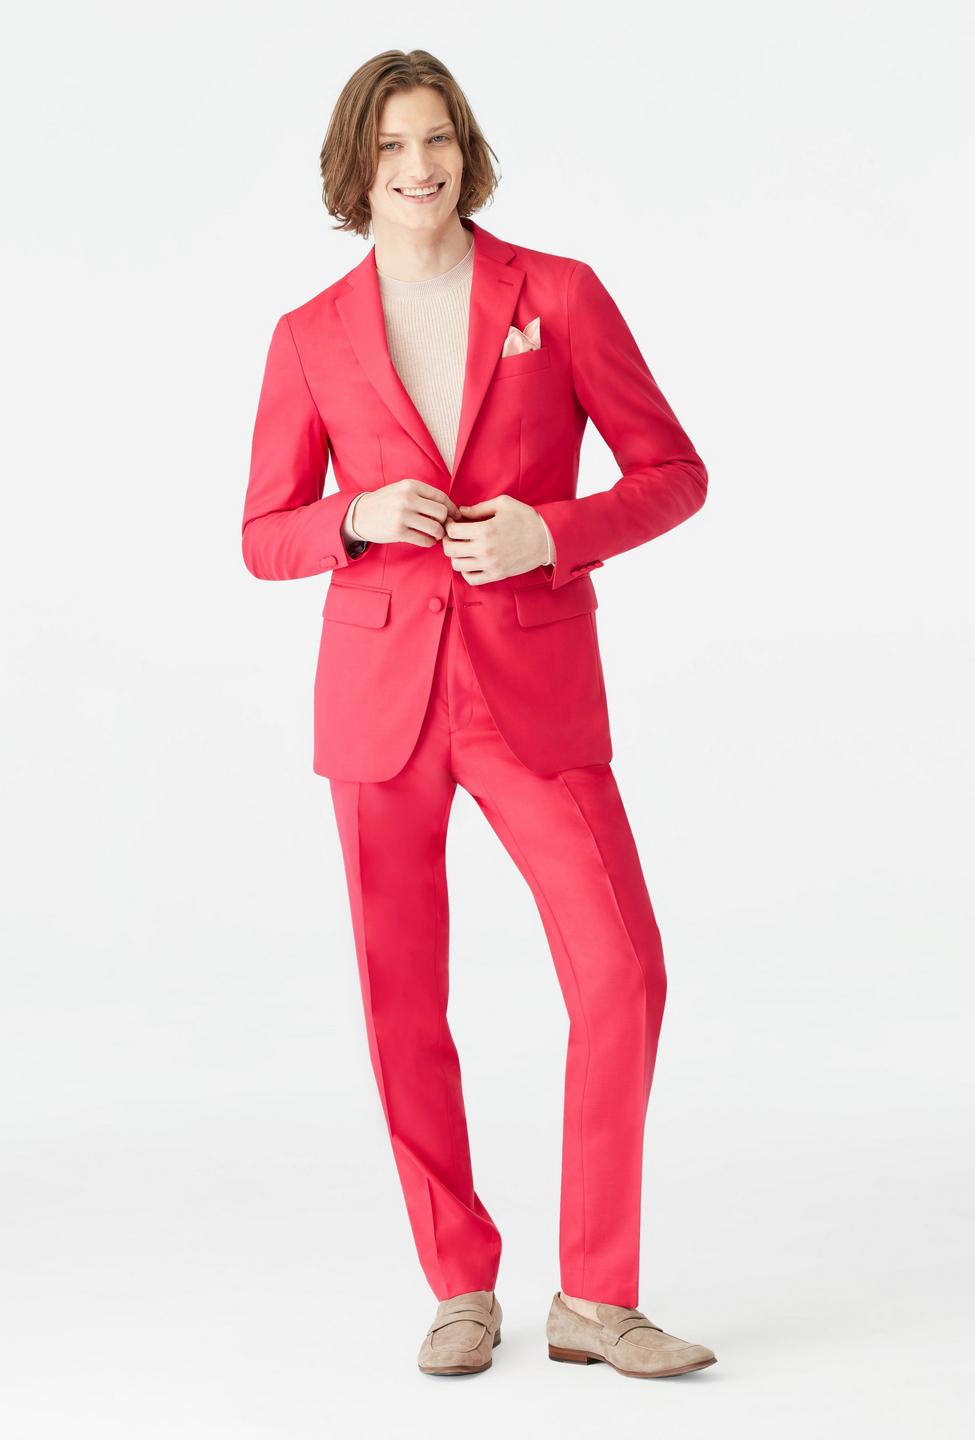 Pink suit - Harrogate Solid Design from Luxury Indochino Collection